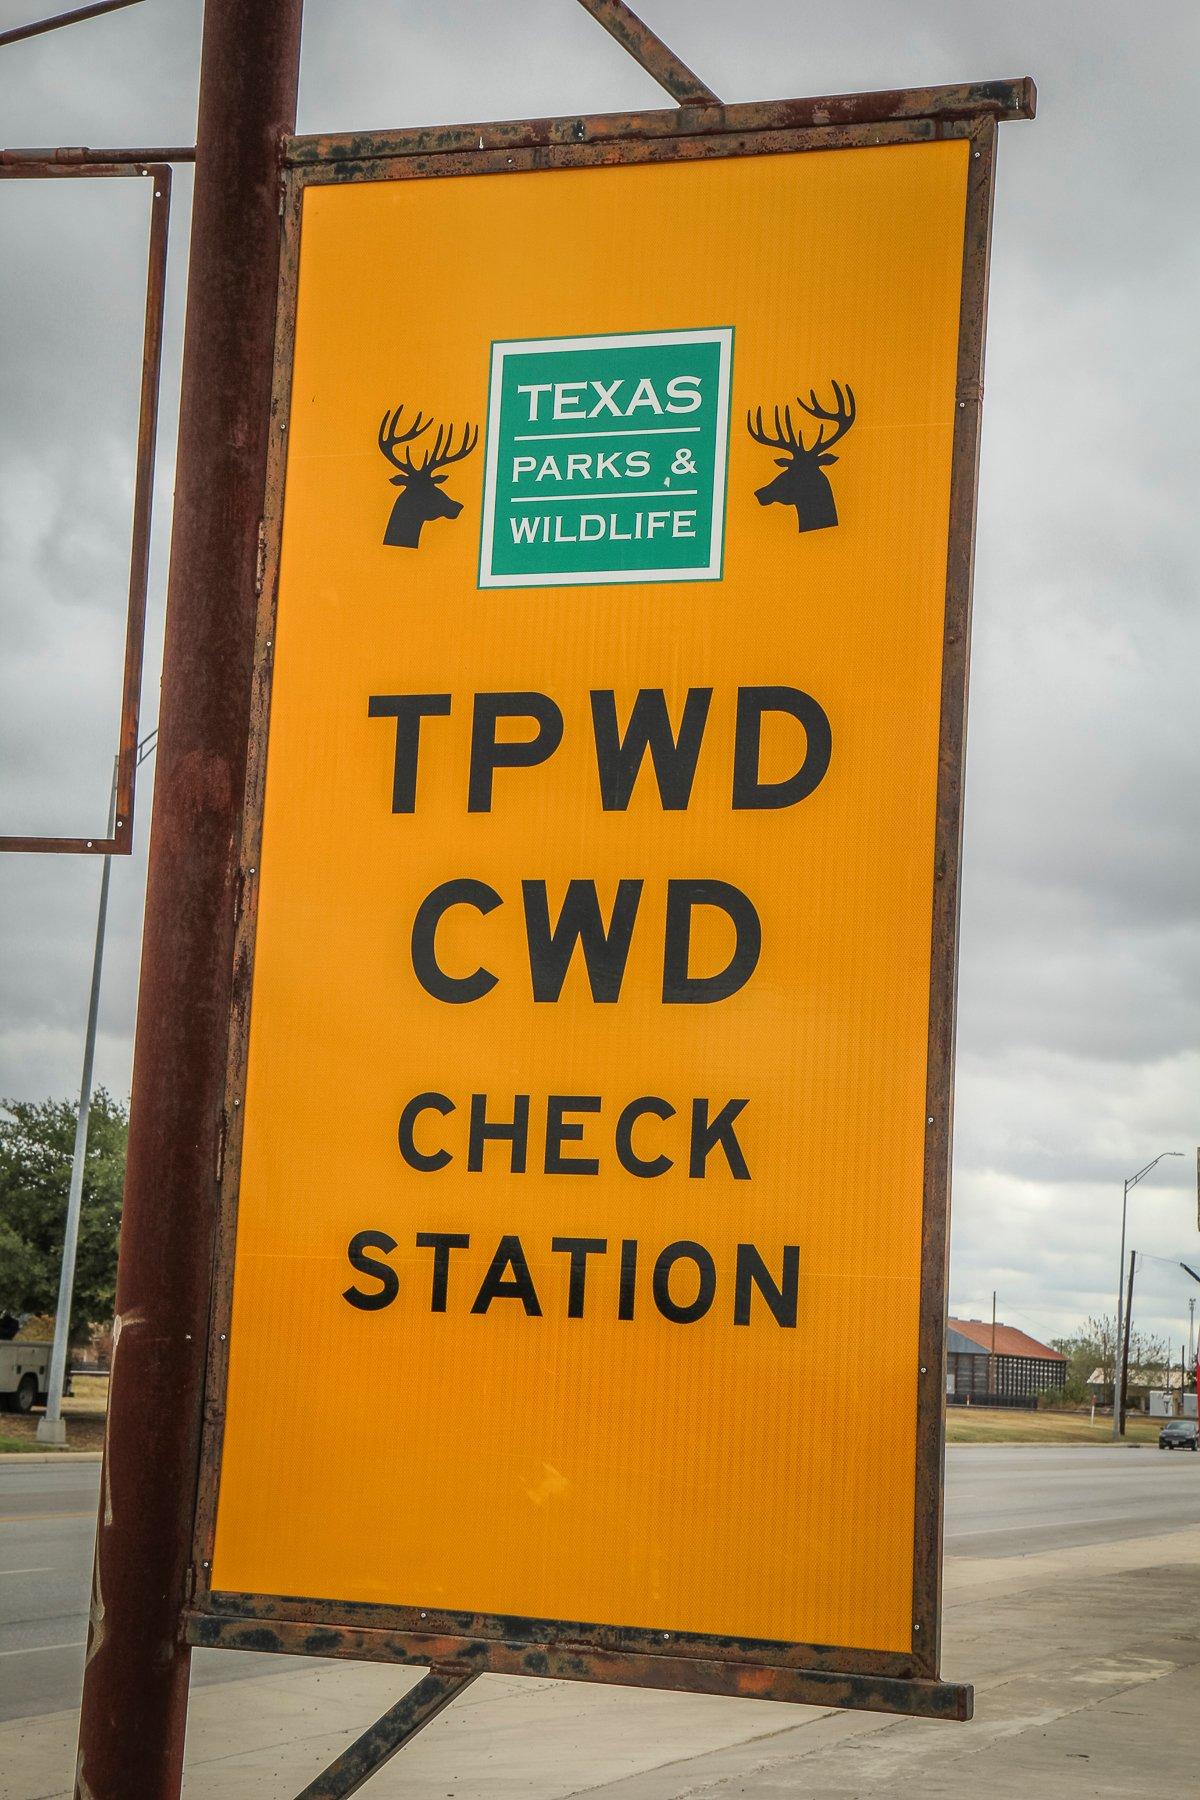 A CWD check station in Texas. Image by Will Brantley